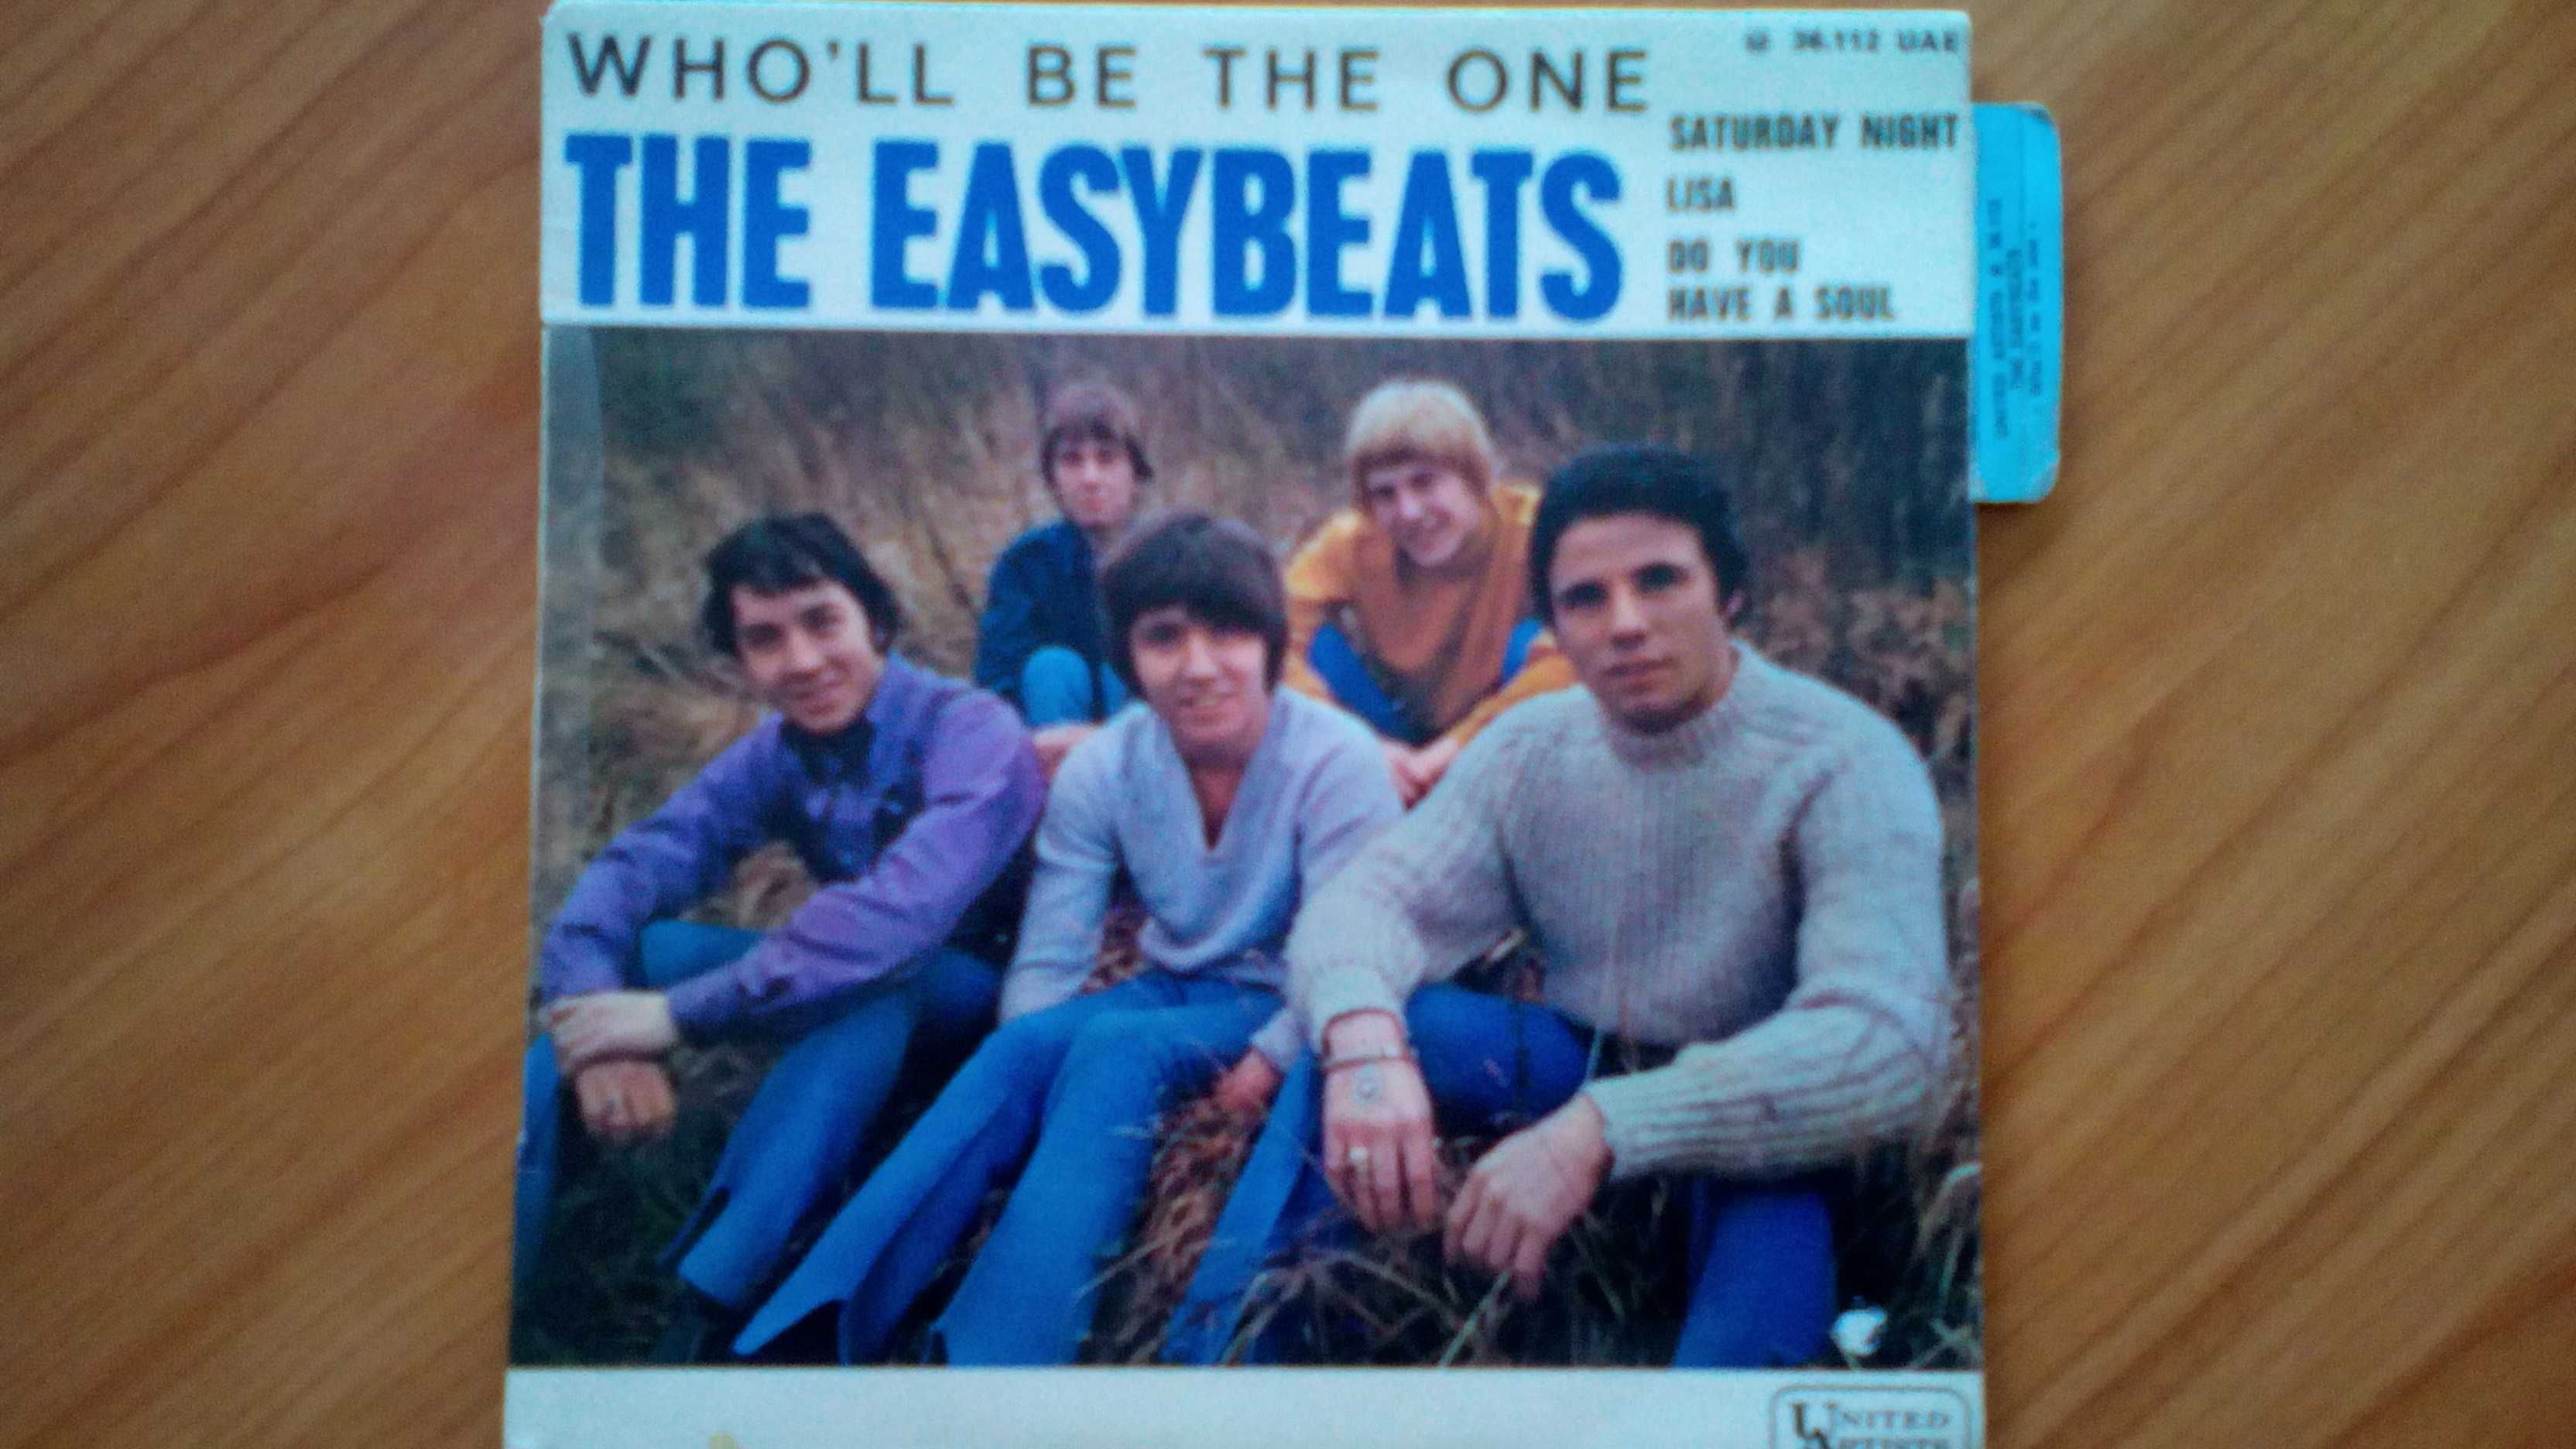 The Easybeats who'll be the One 1967